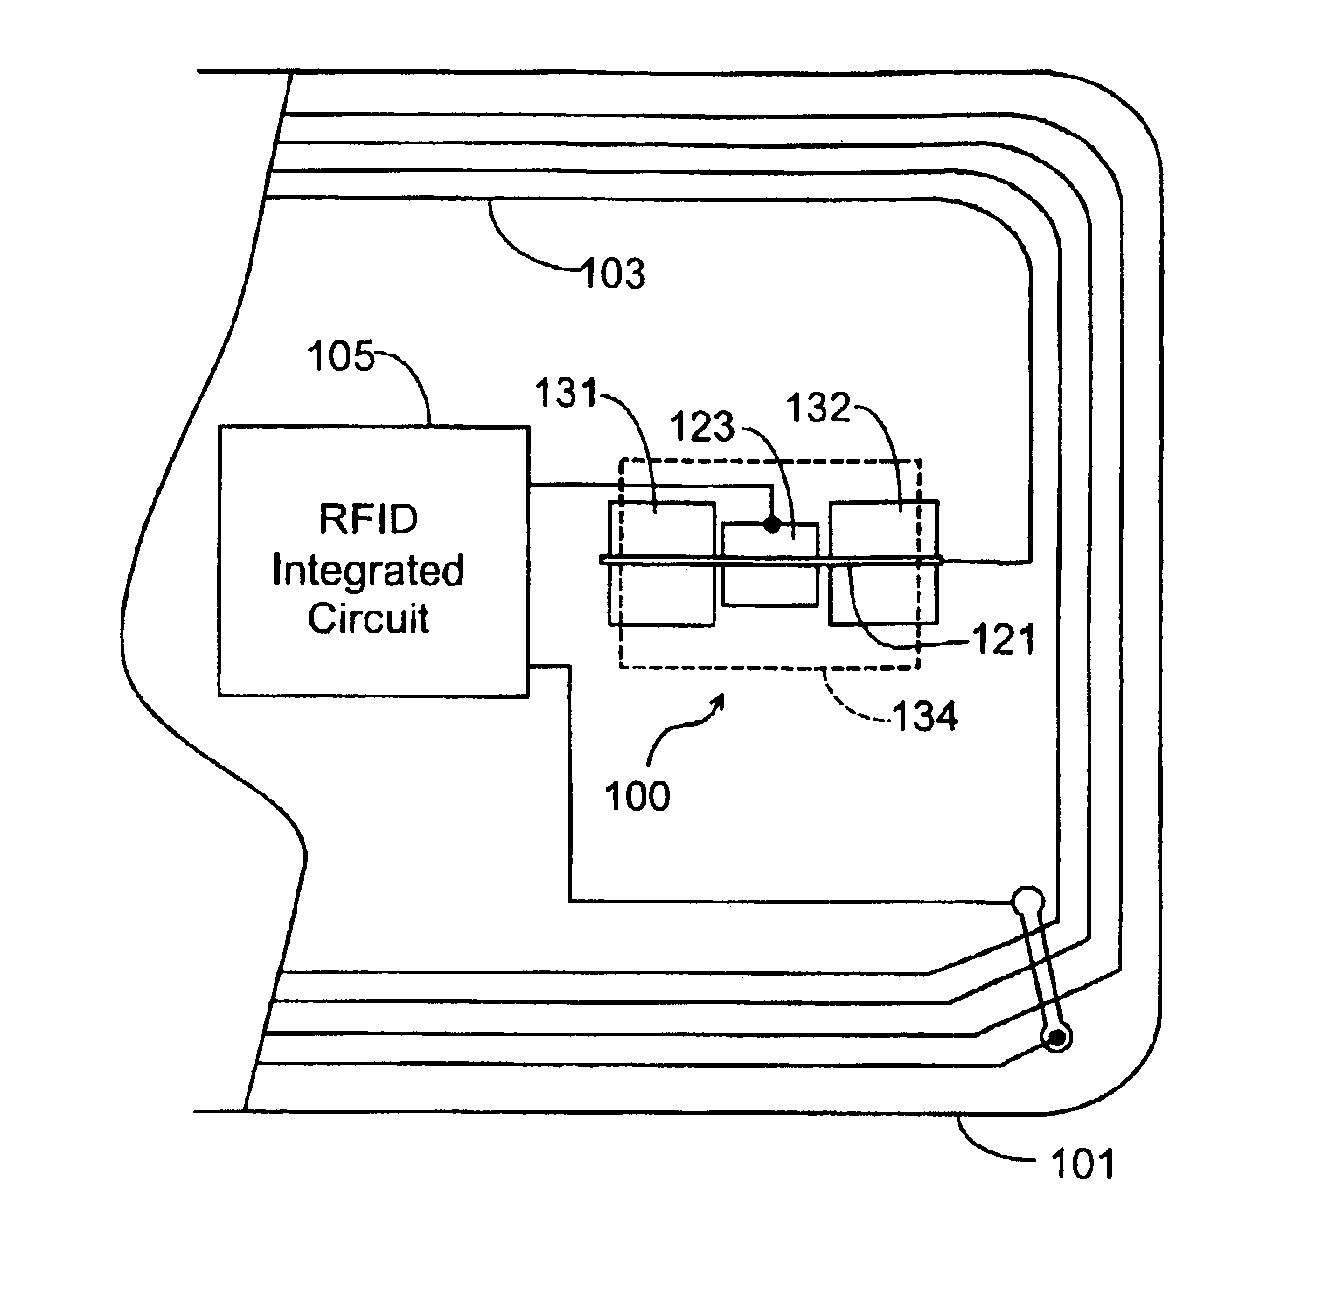 Manually operated switch for enabling and disabling an RFID card